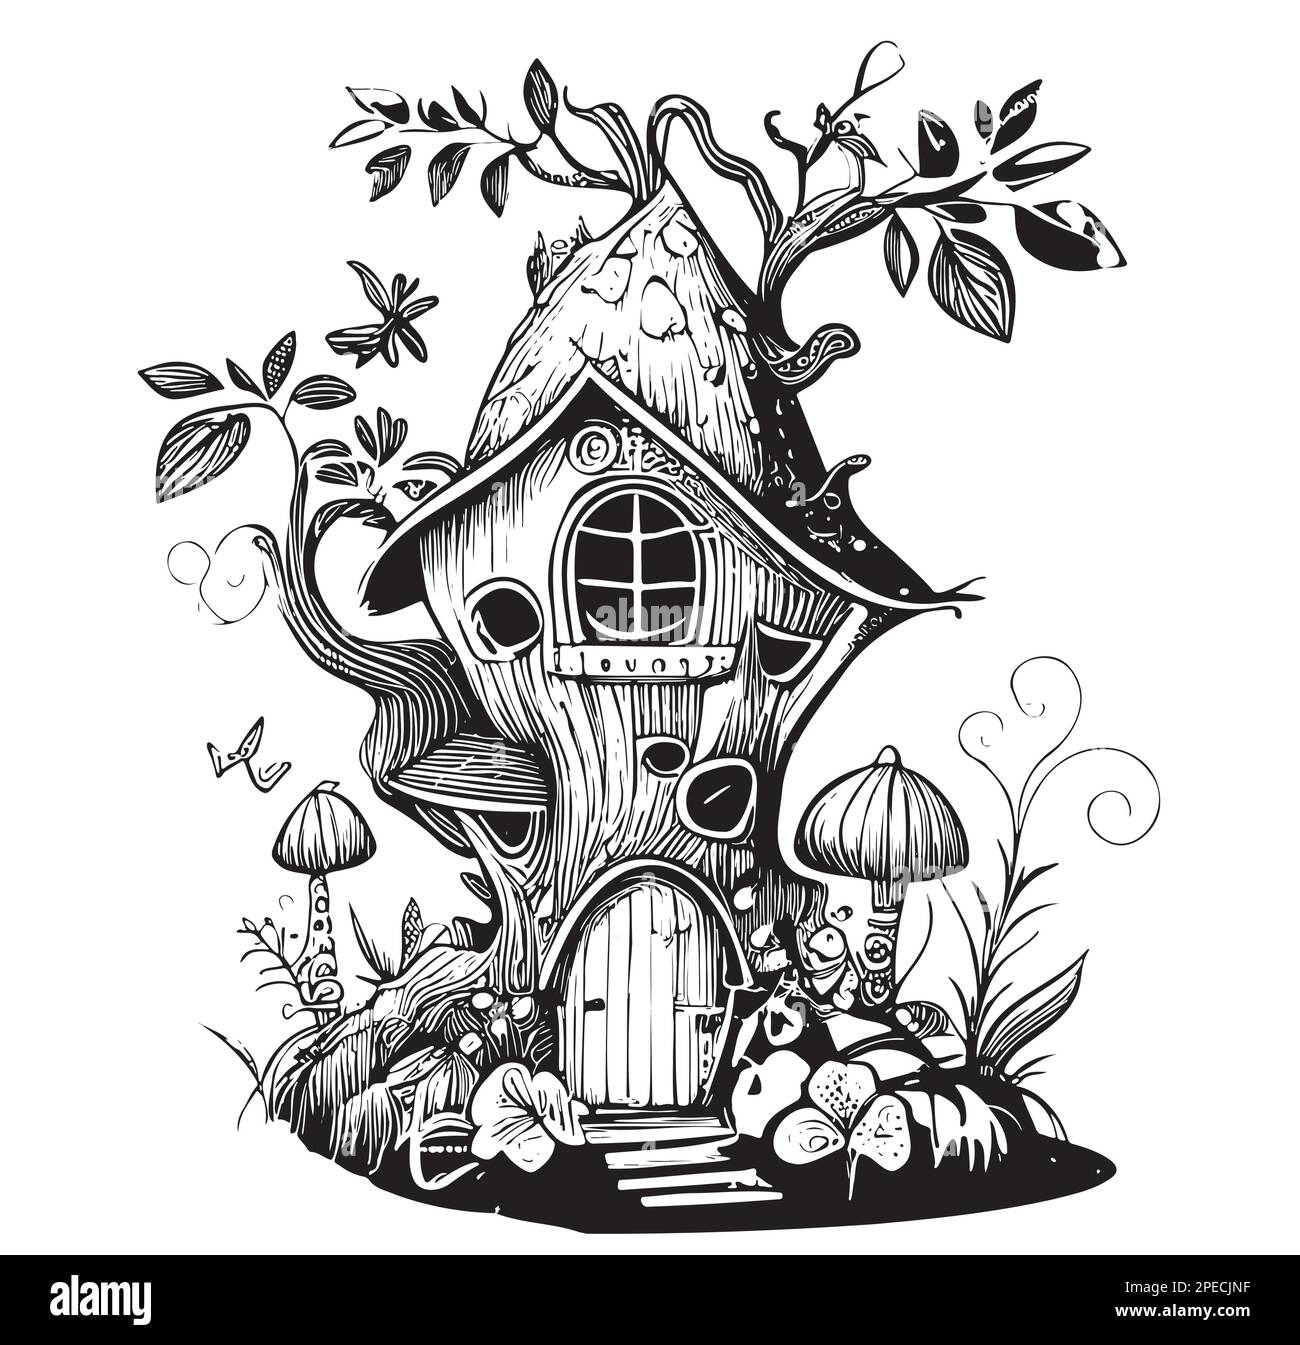 Fairy house in the forest hand drawn sketch illustration Stock Vector